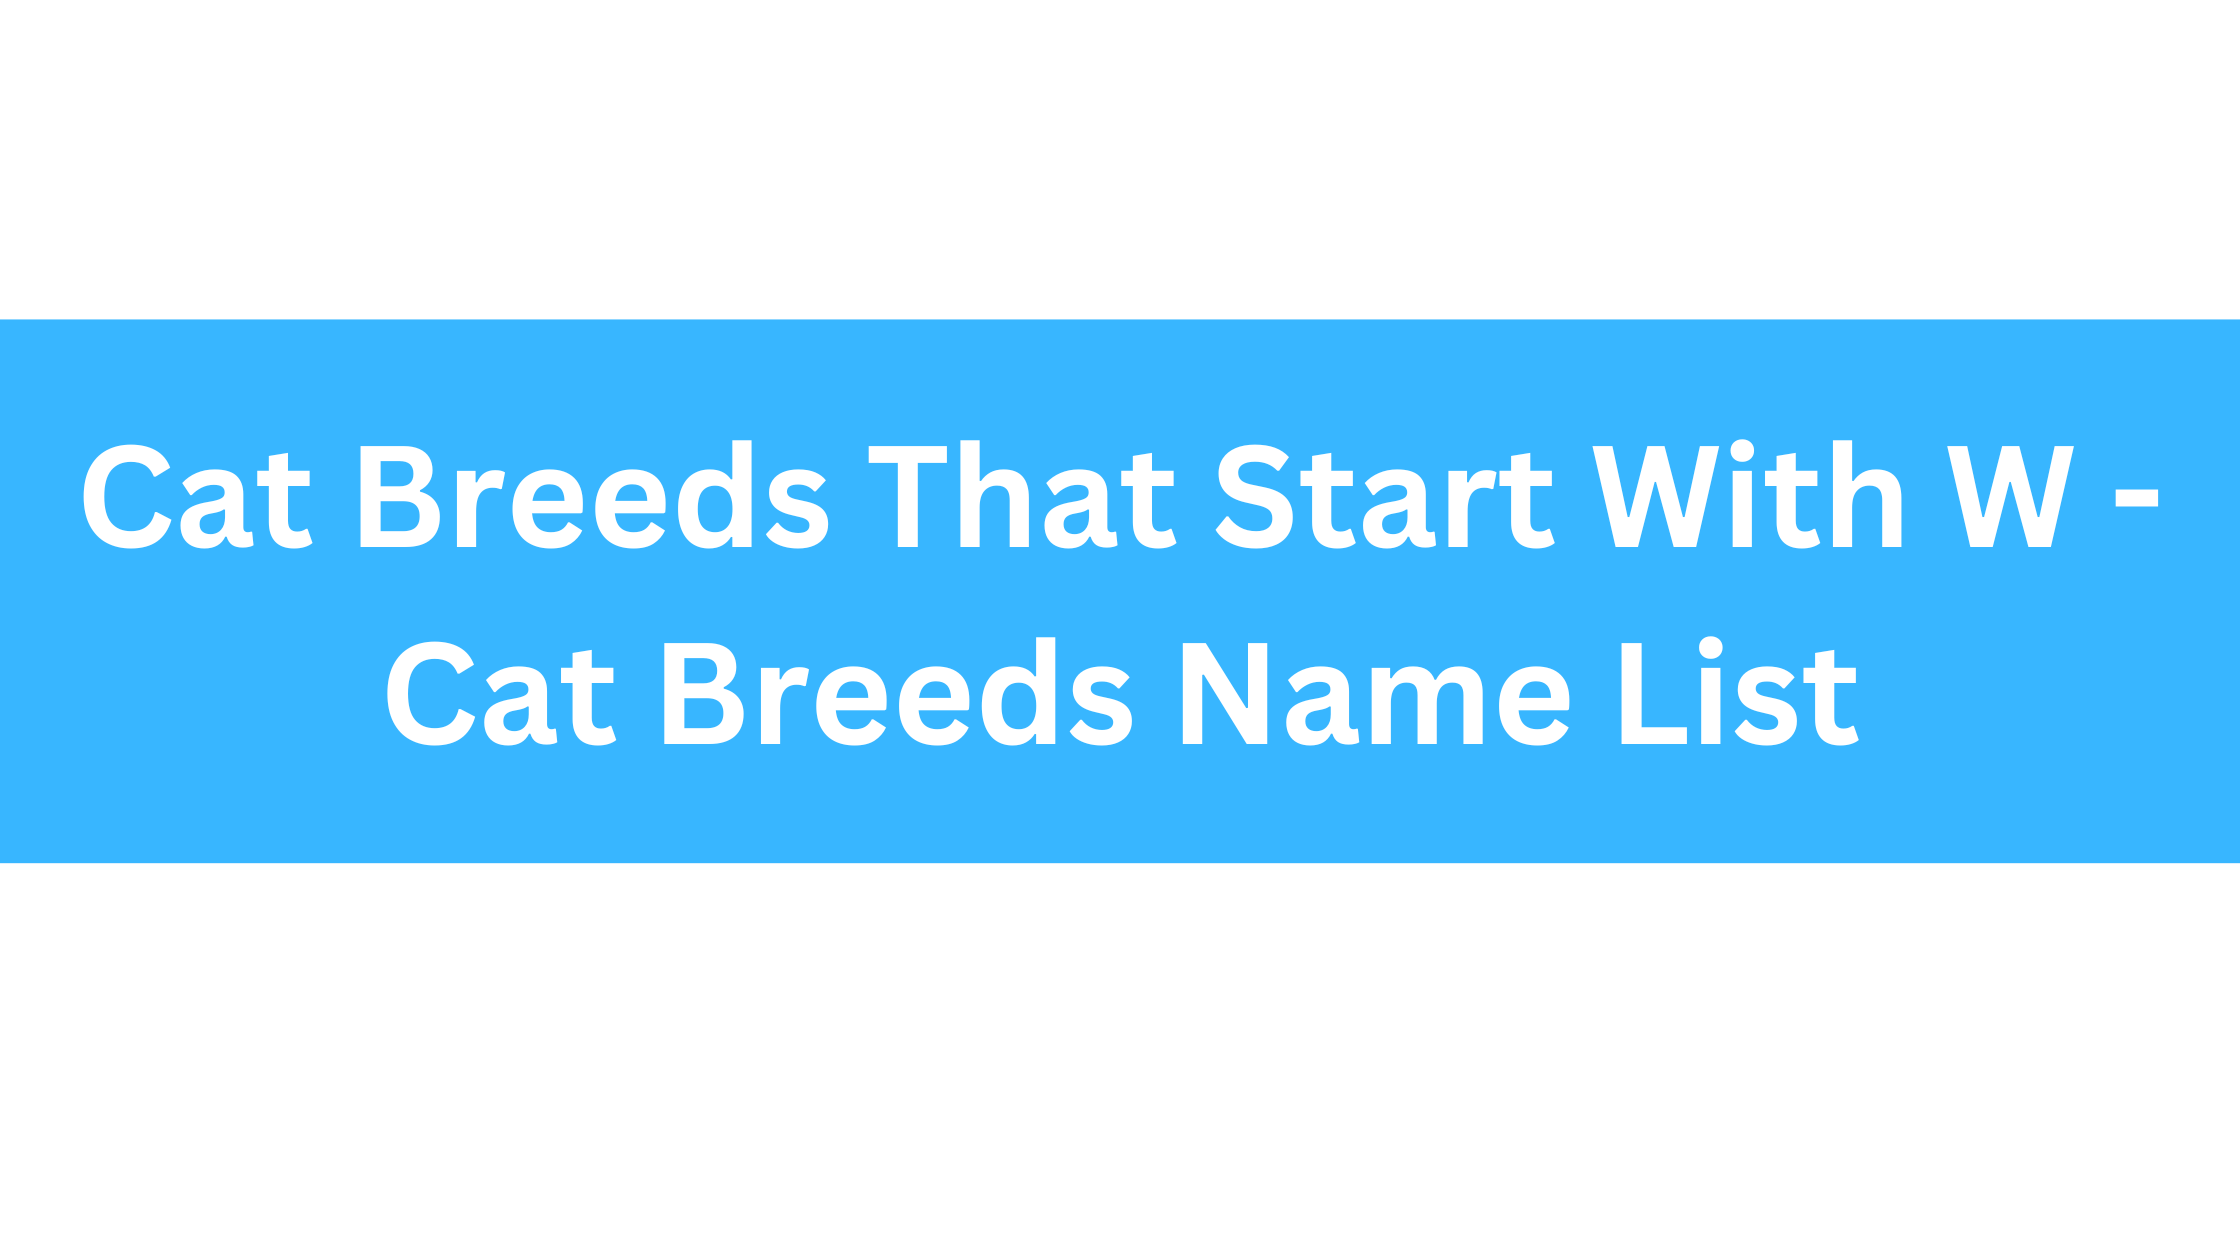 Cat Breeds That Start With W